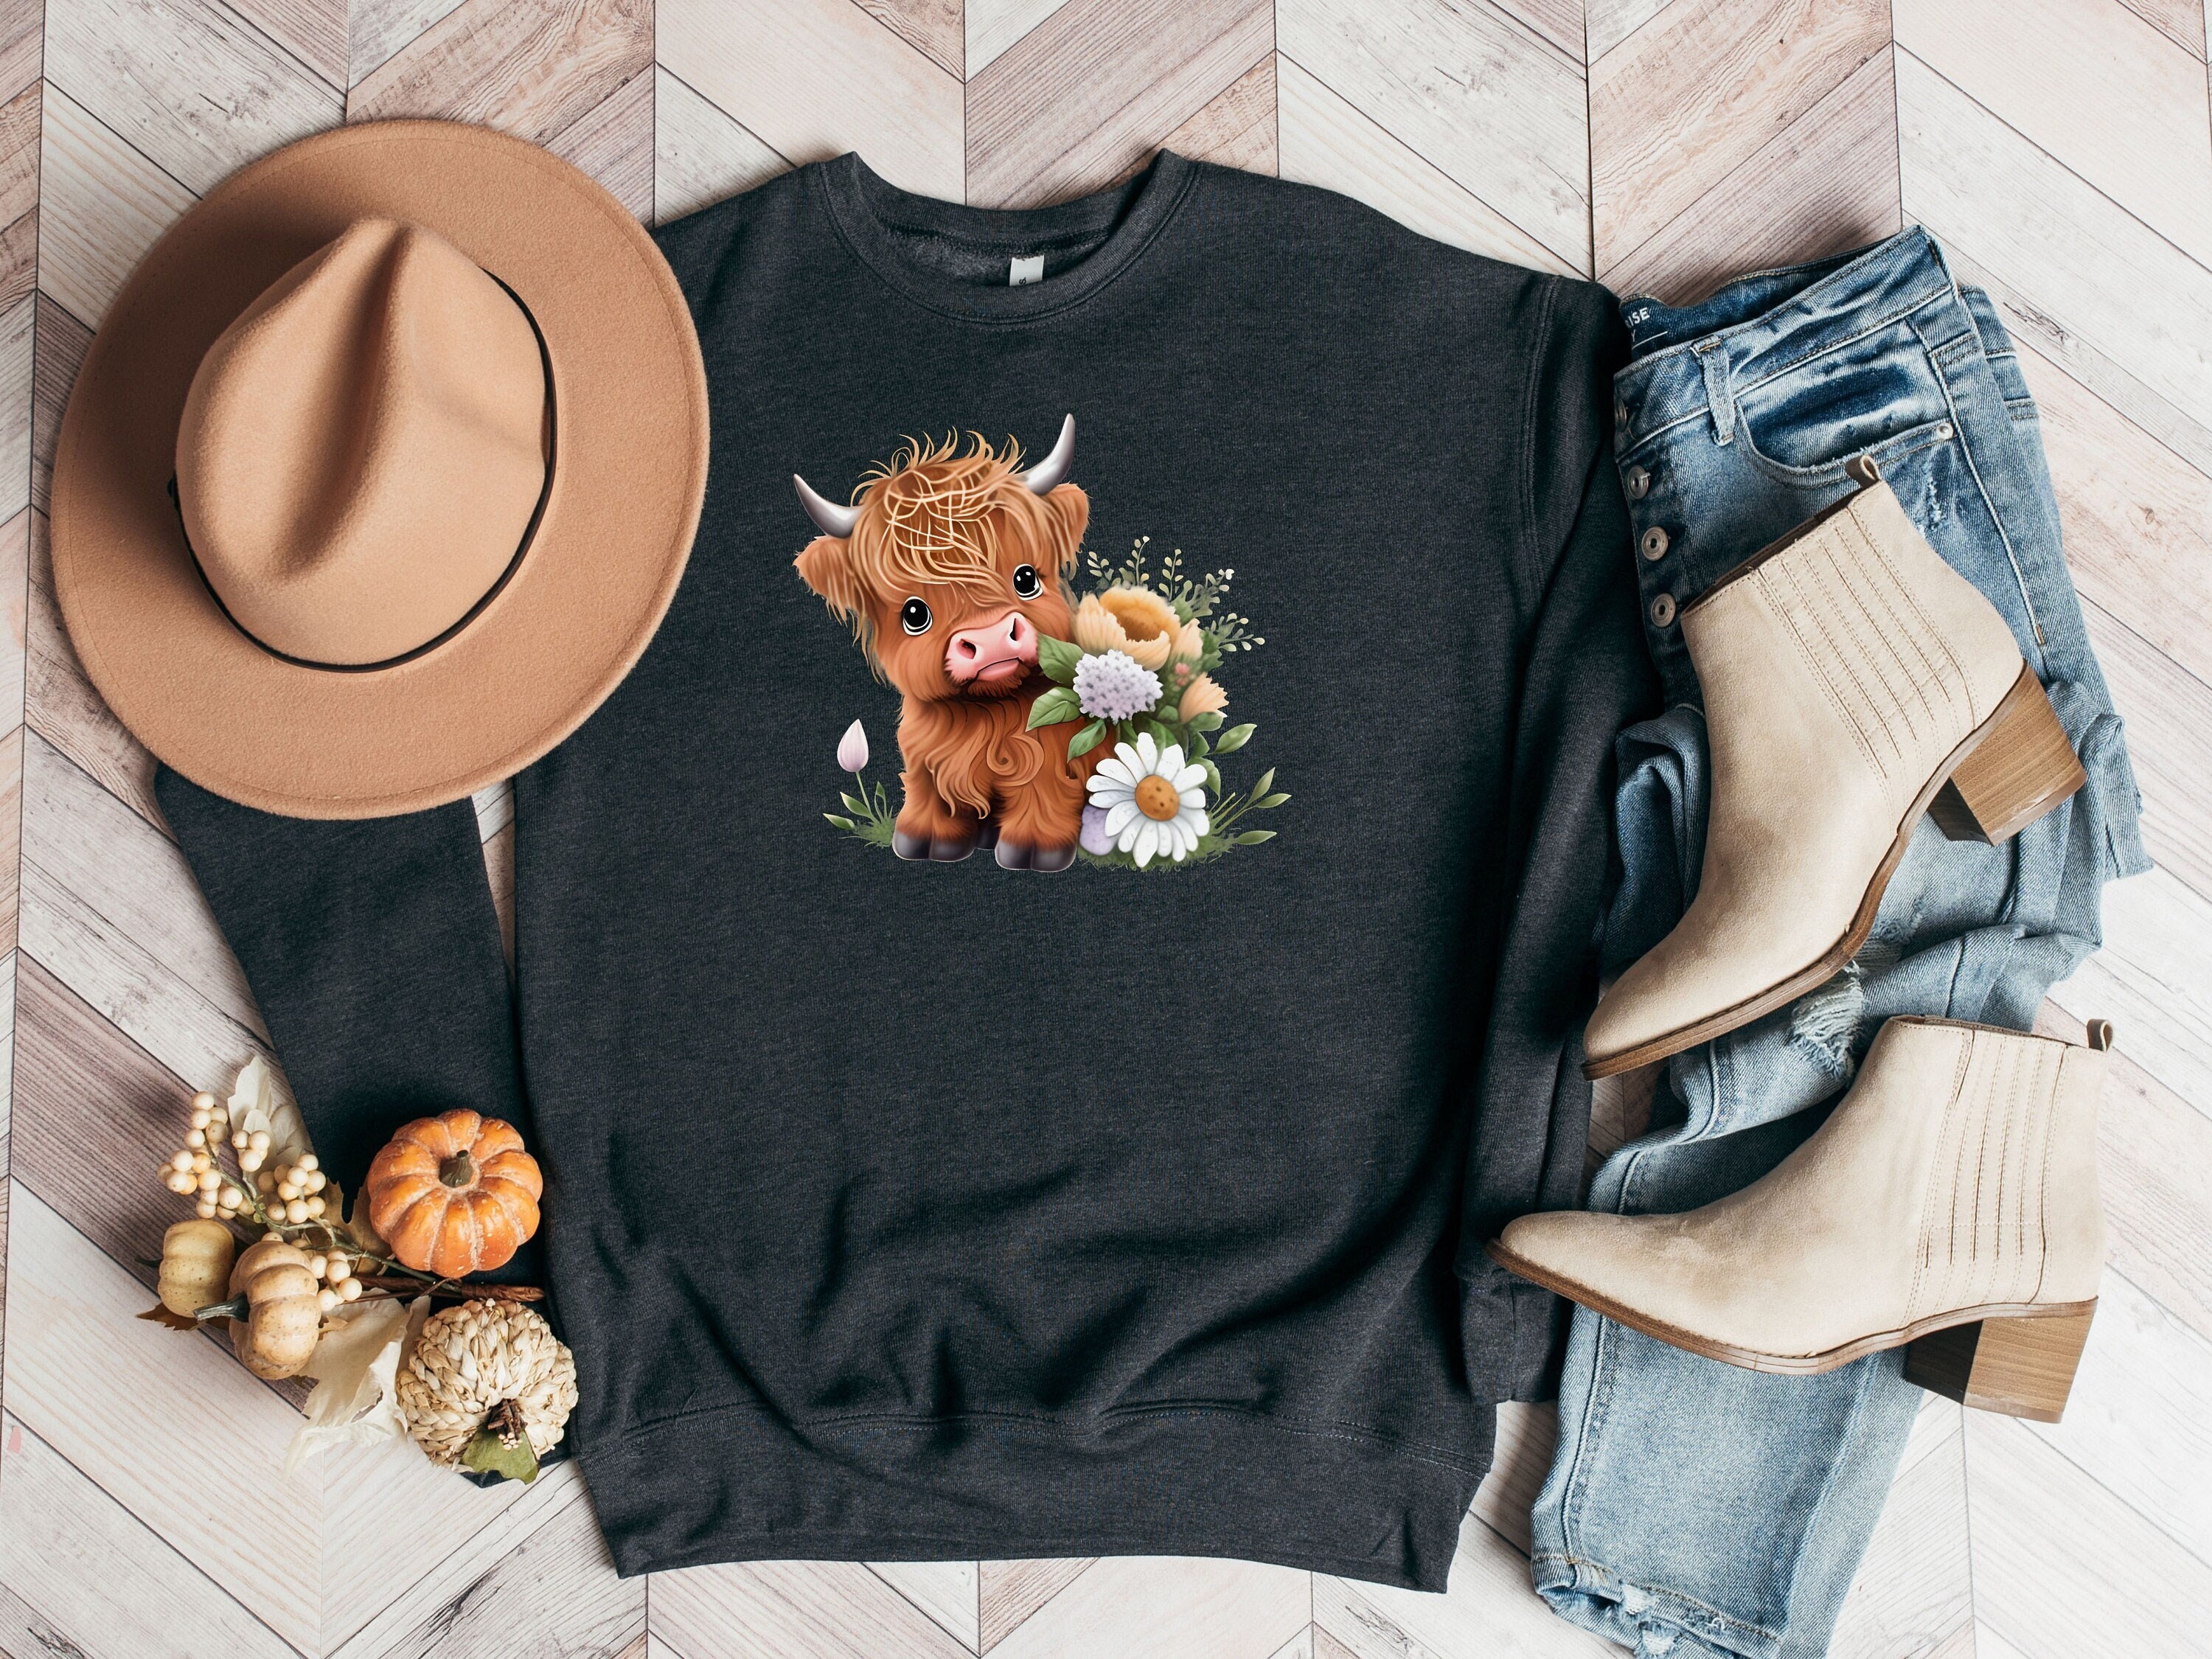 Adorable Baby Highland Cow Crewneck Sweatshirt With Flowers - Etsy